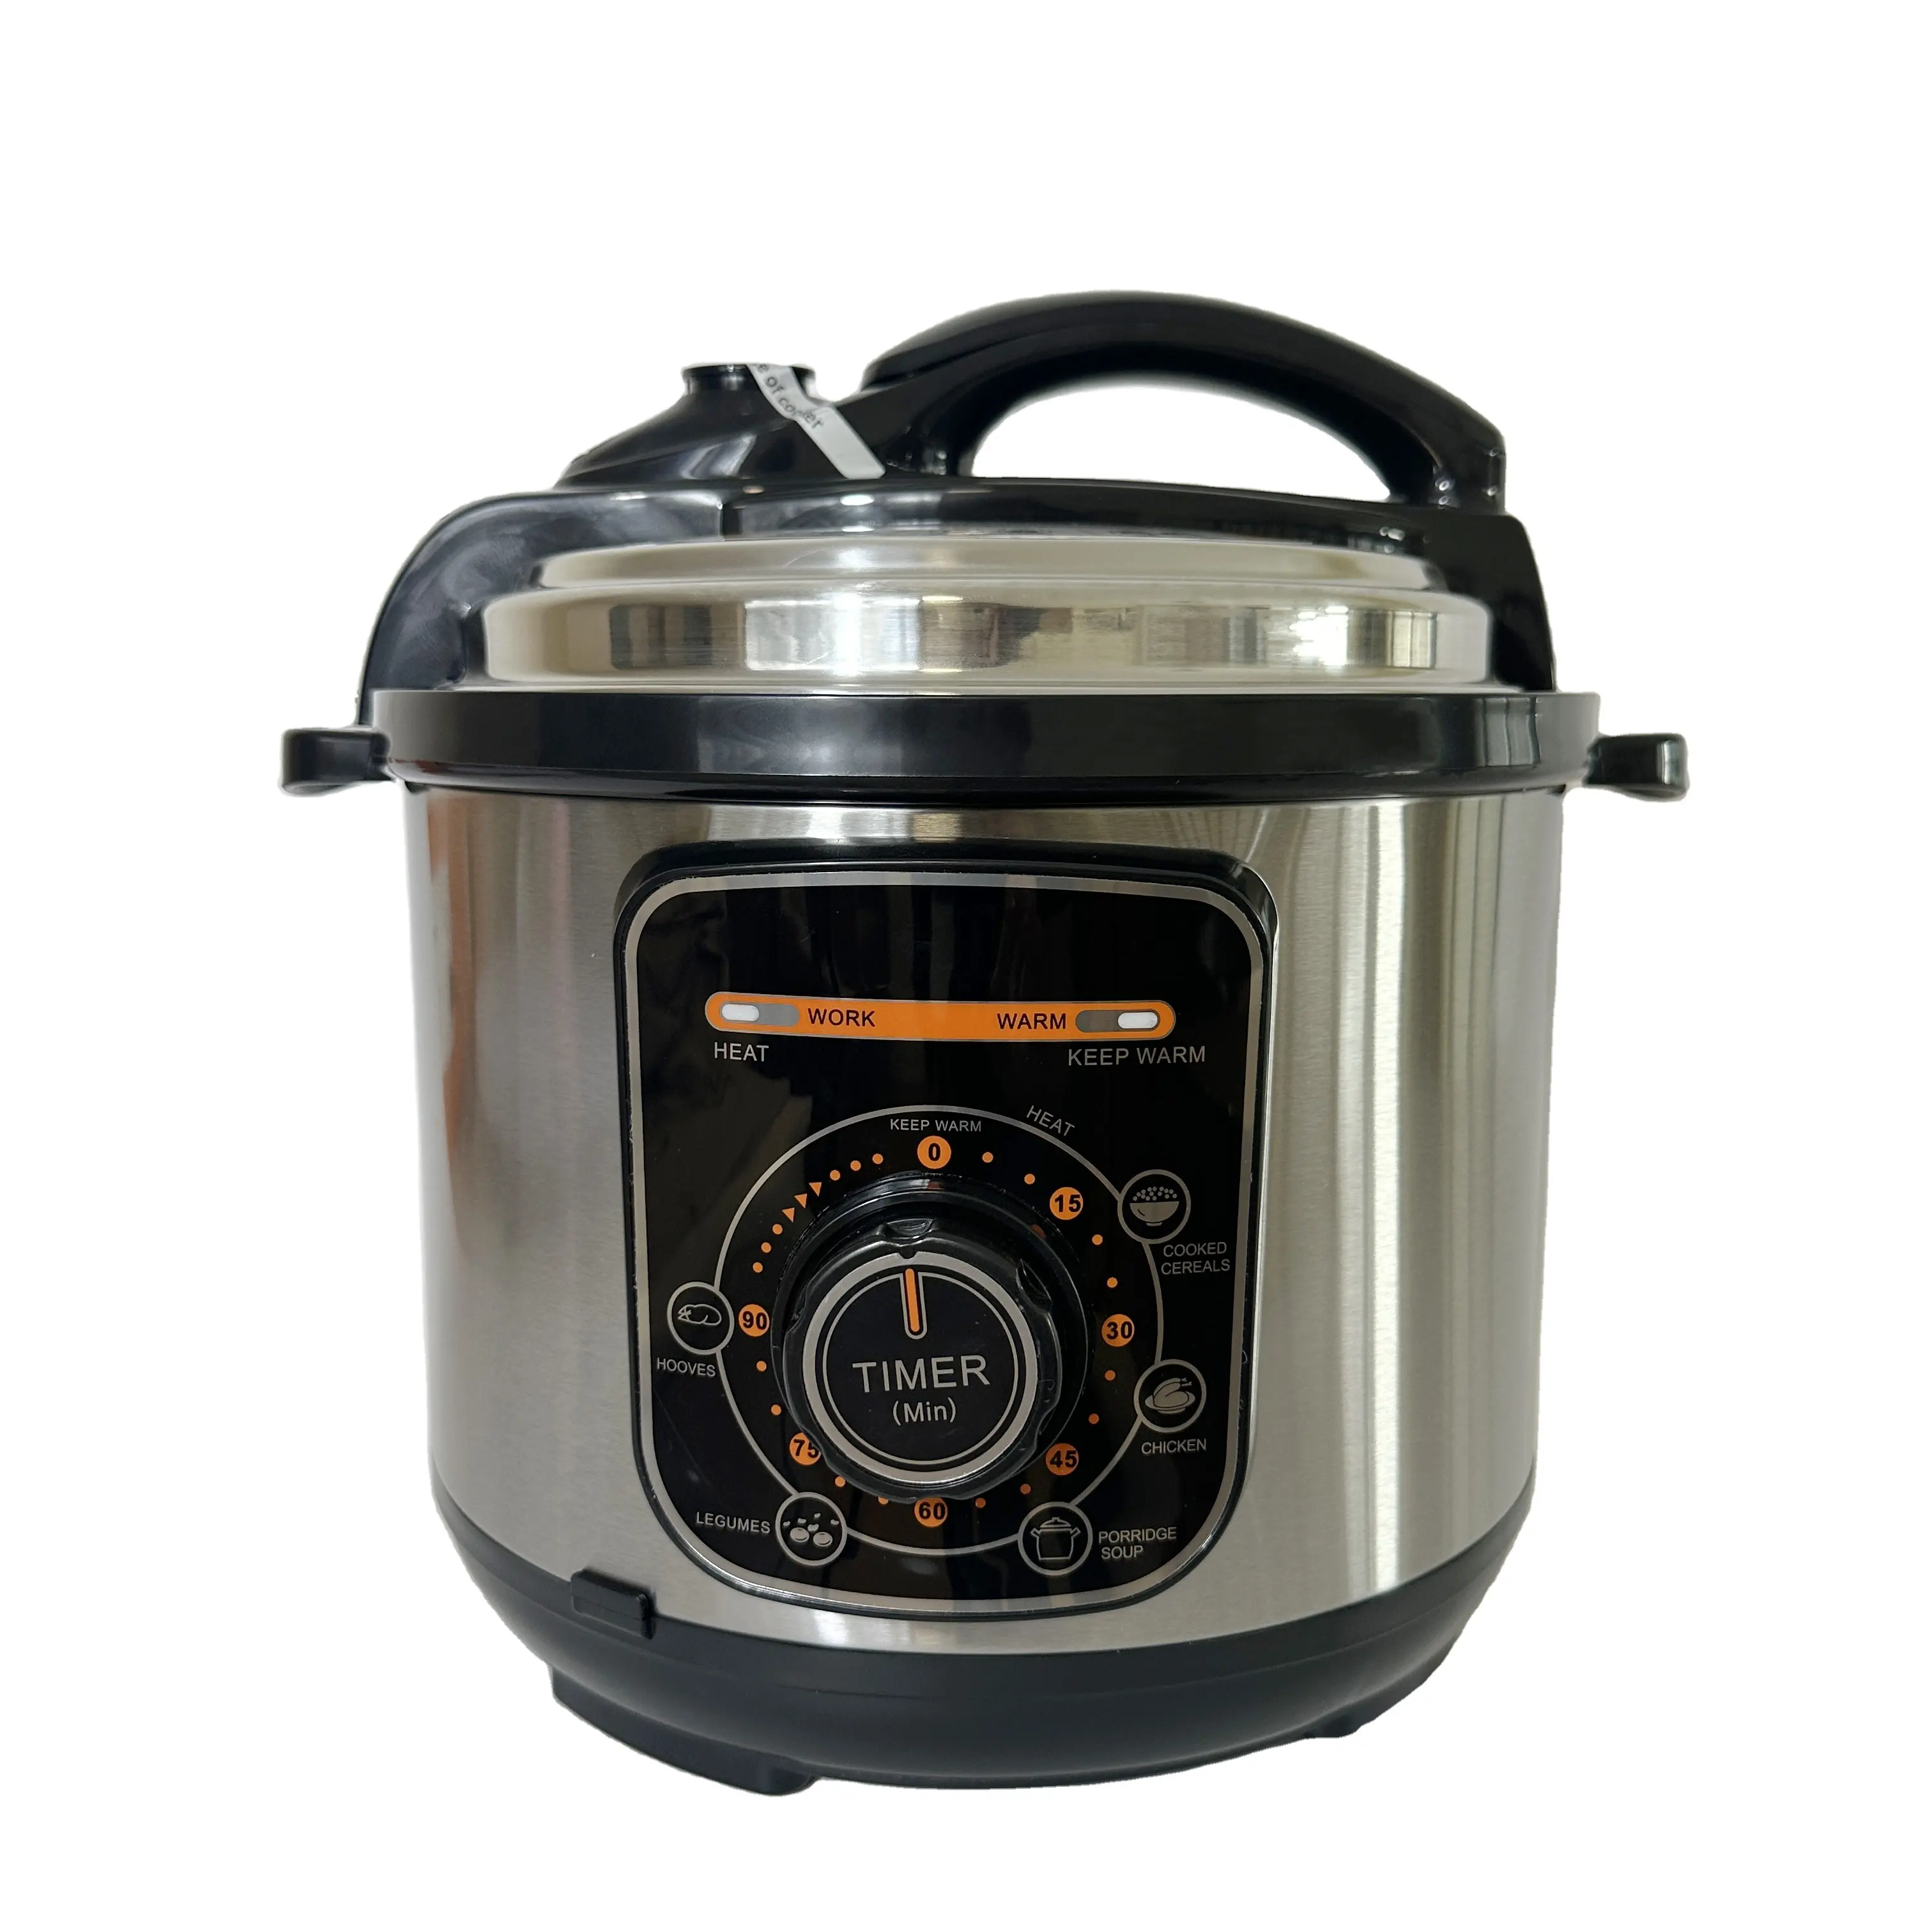 Multifunctional 14 in 1 Digital Display Non Stick Stainless Steel Electric Pressure Cooker 6L 1000W